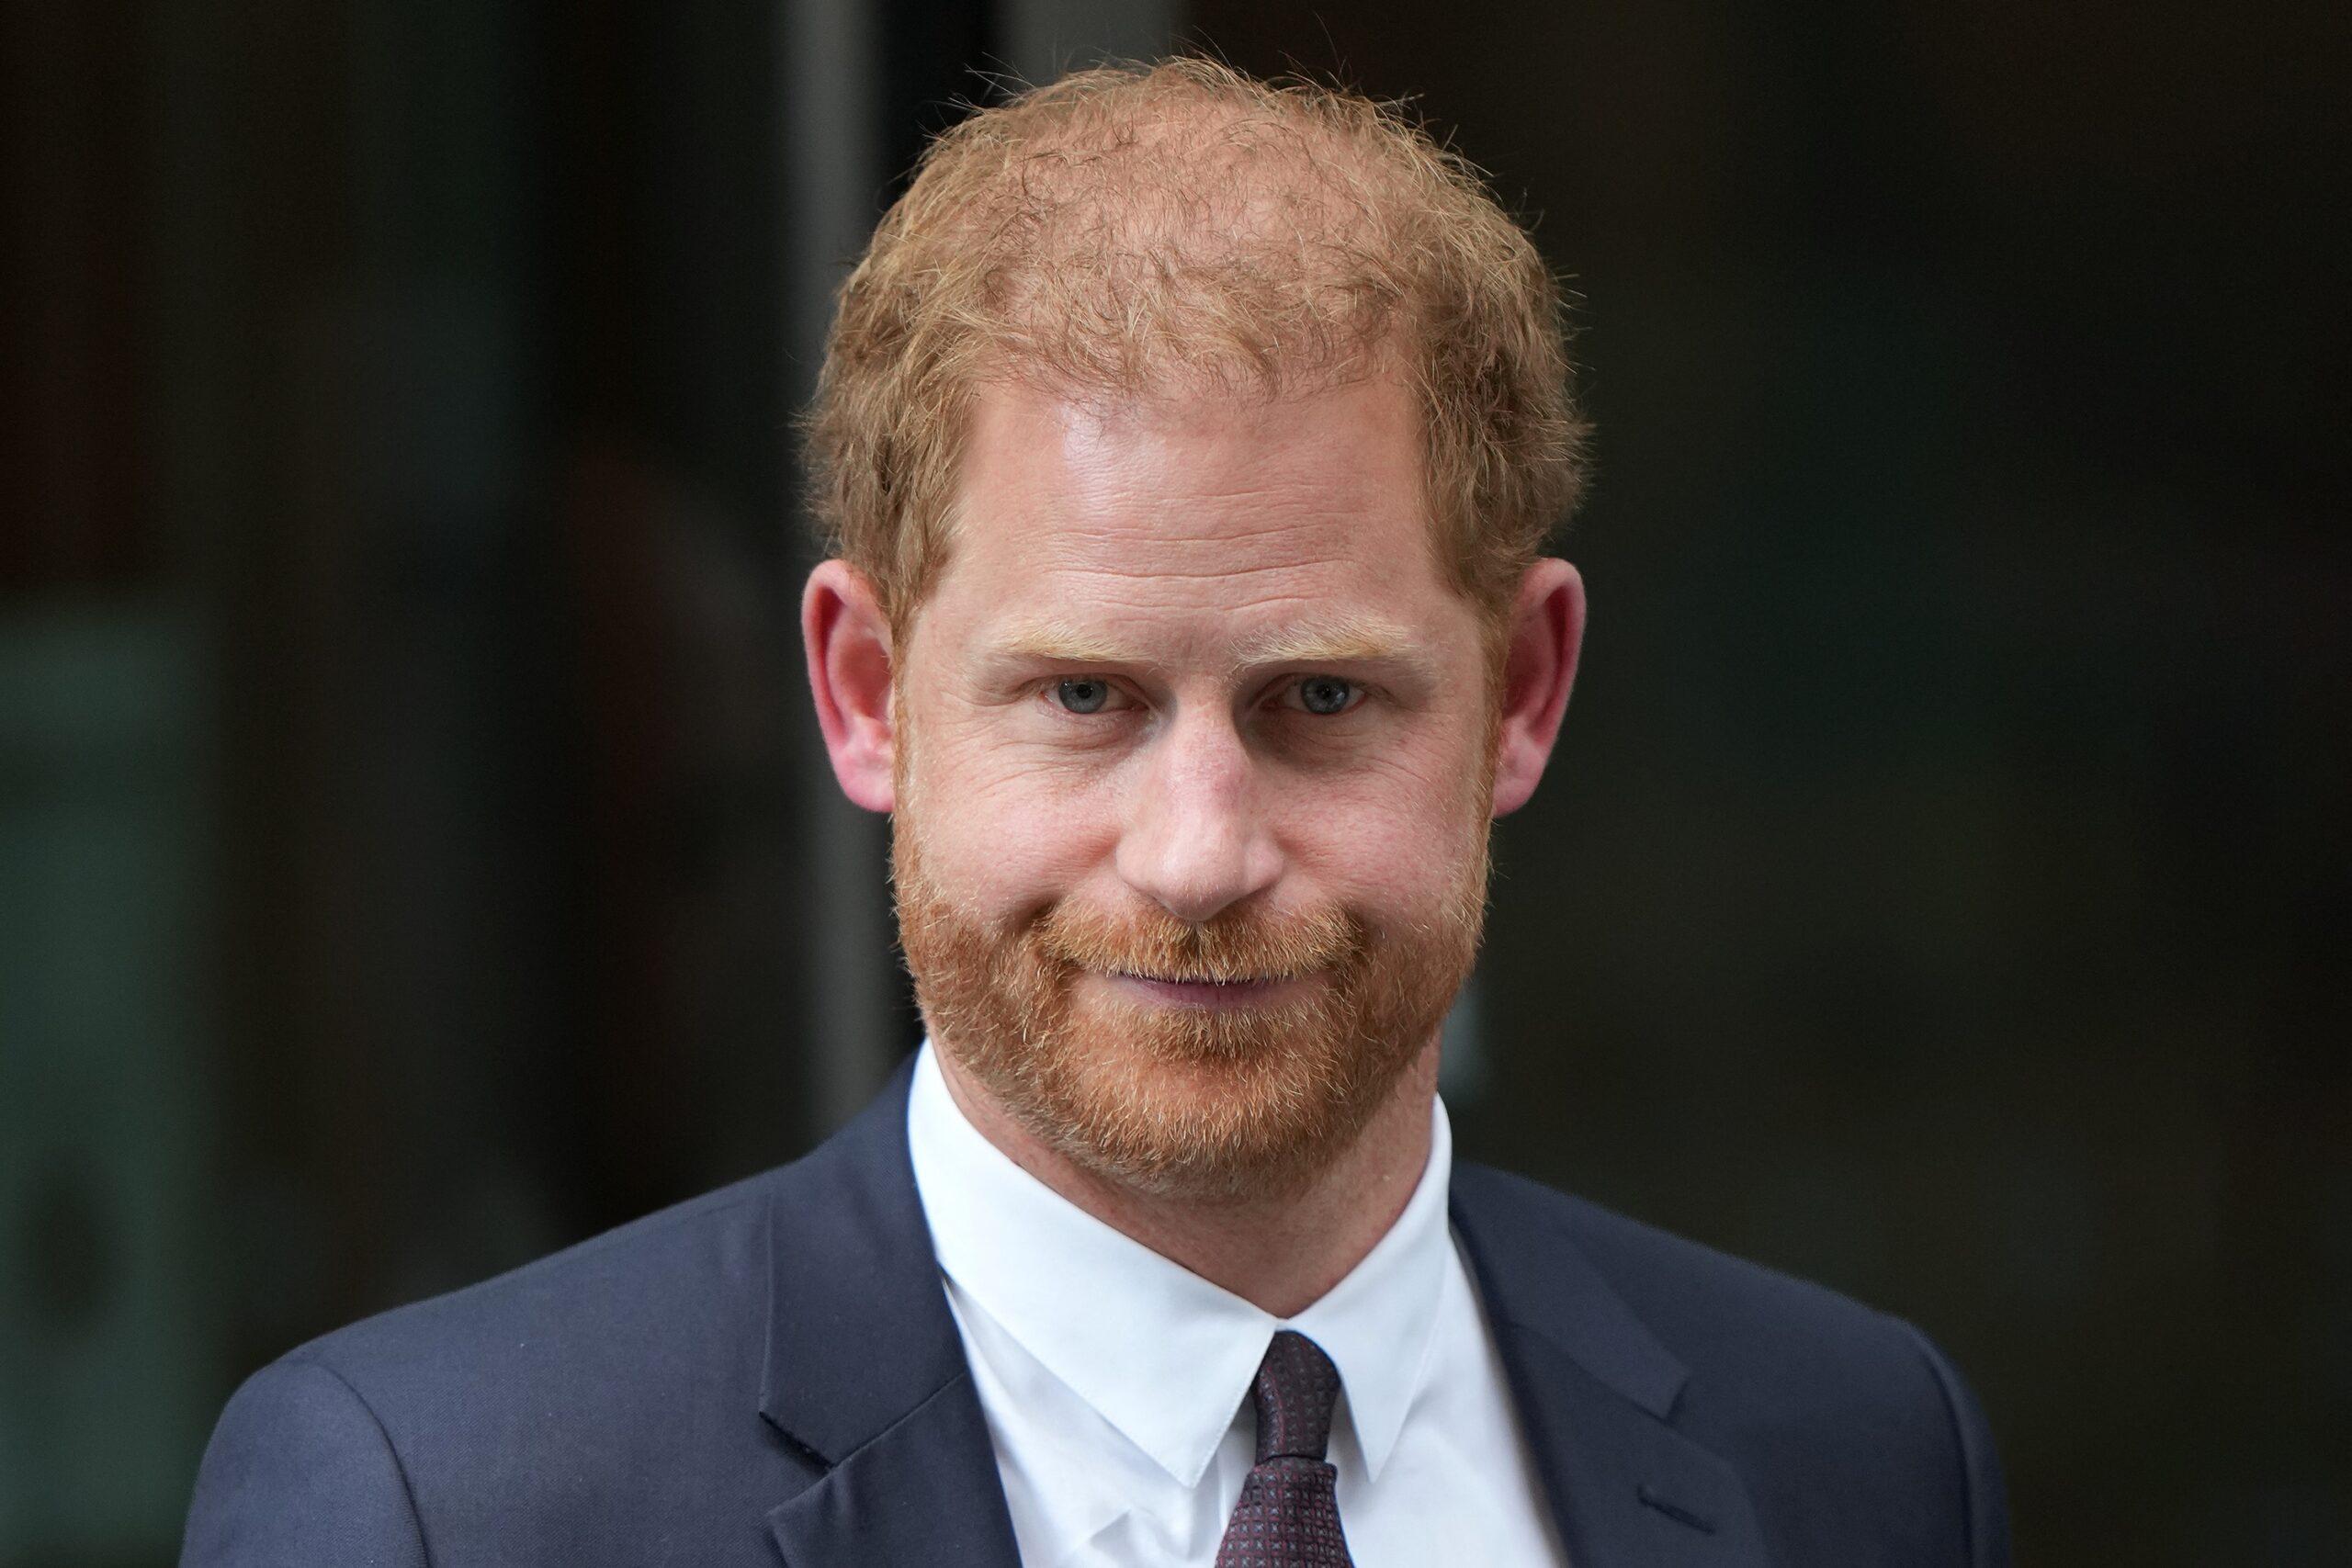 Prince Harry attends Court at the start of his case against Mirror Group Newspapers